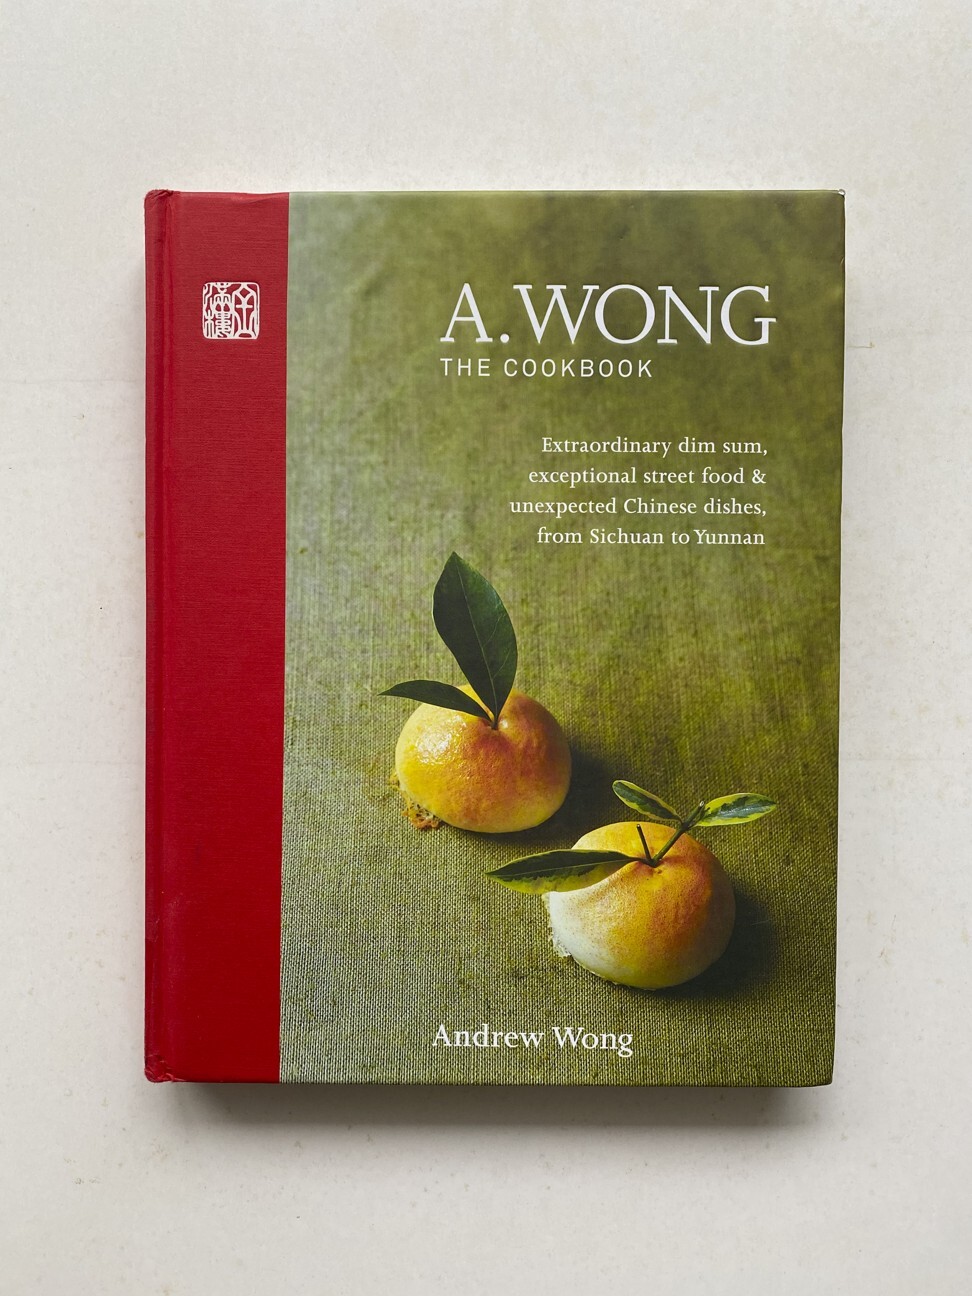 A. Wong: The Cookbook by Andrew Wong. Photo: SCMP / Jonathan Wong